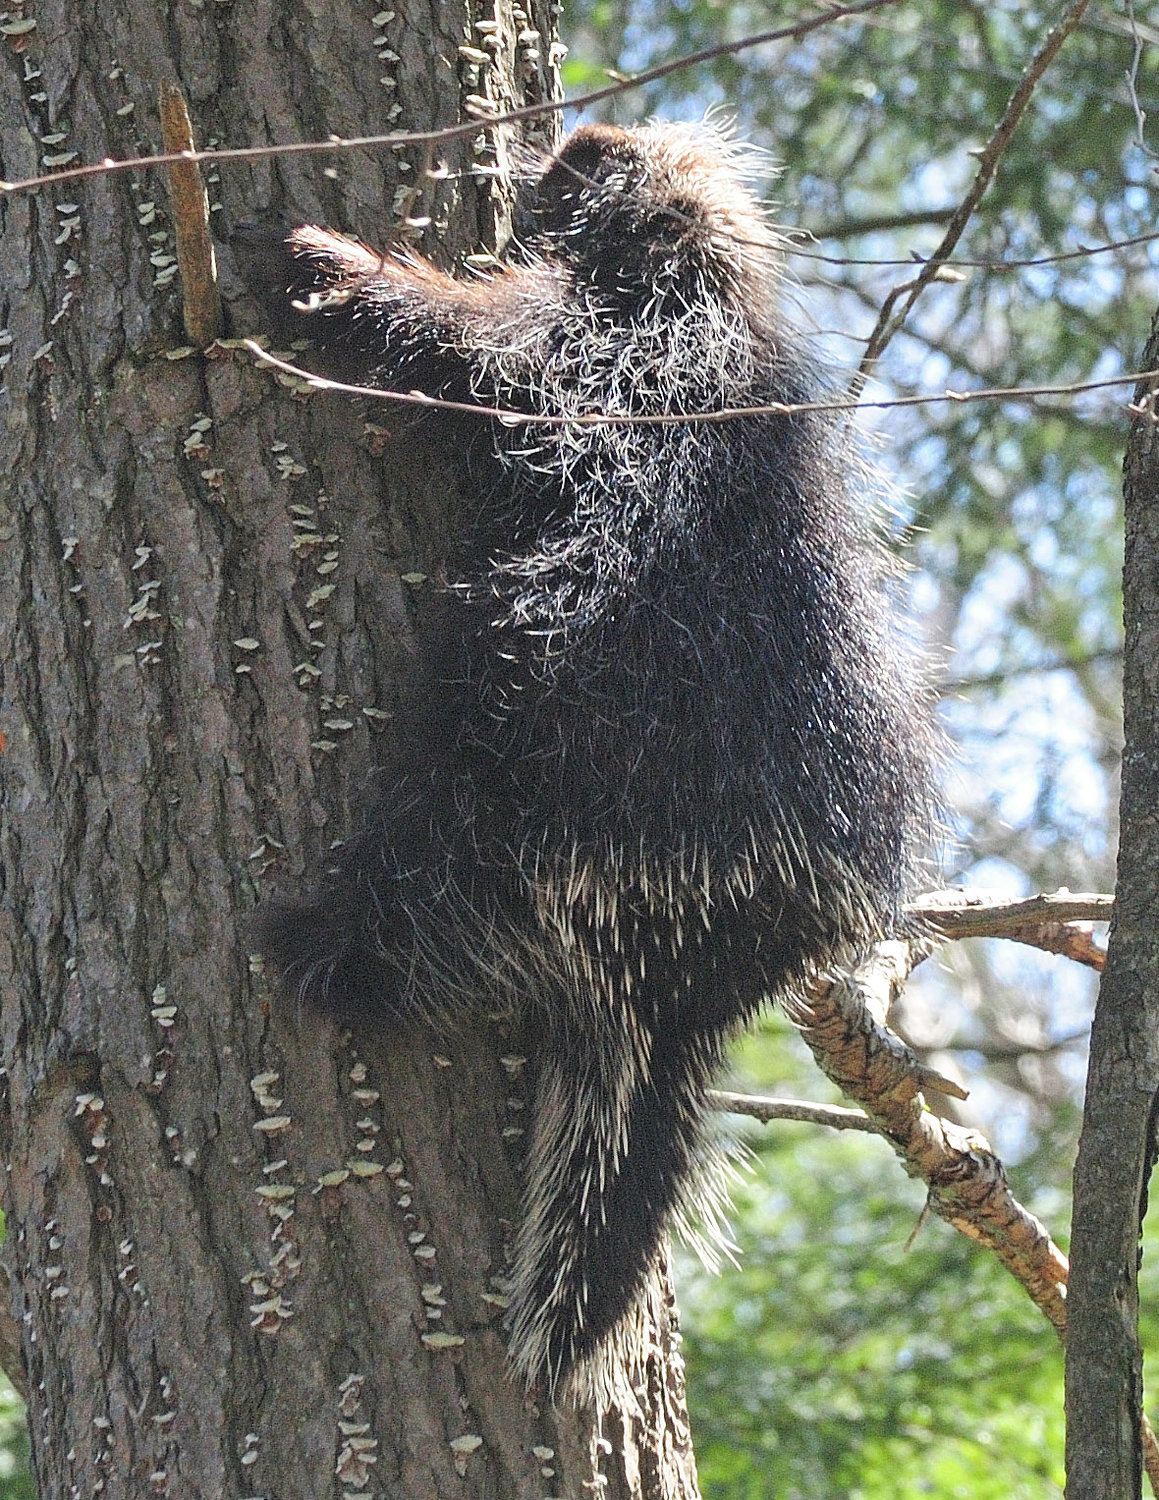 Porcupines can be found wherever there are trees and vegetation for them to eat. They may climb trees to escape danger or just to forage on sprigs or bark. Contrary to folklore, a porcupine cannot “throw” its quills at an attacker; a would-be predator gets quilled by making physical contact with a porcupine—a good reason to practice social distancing.